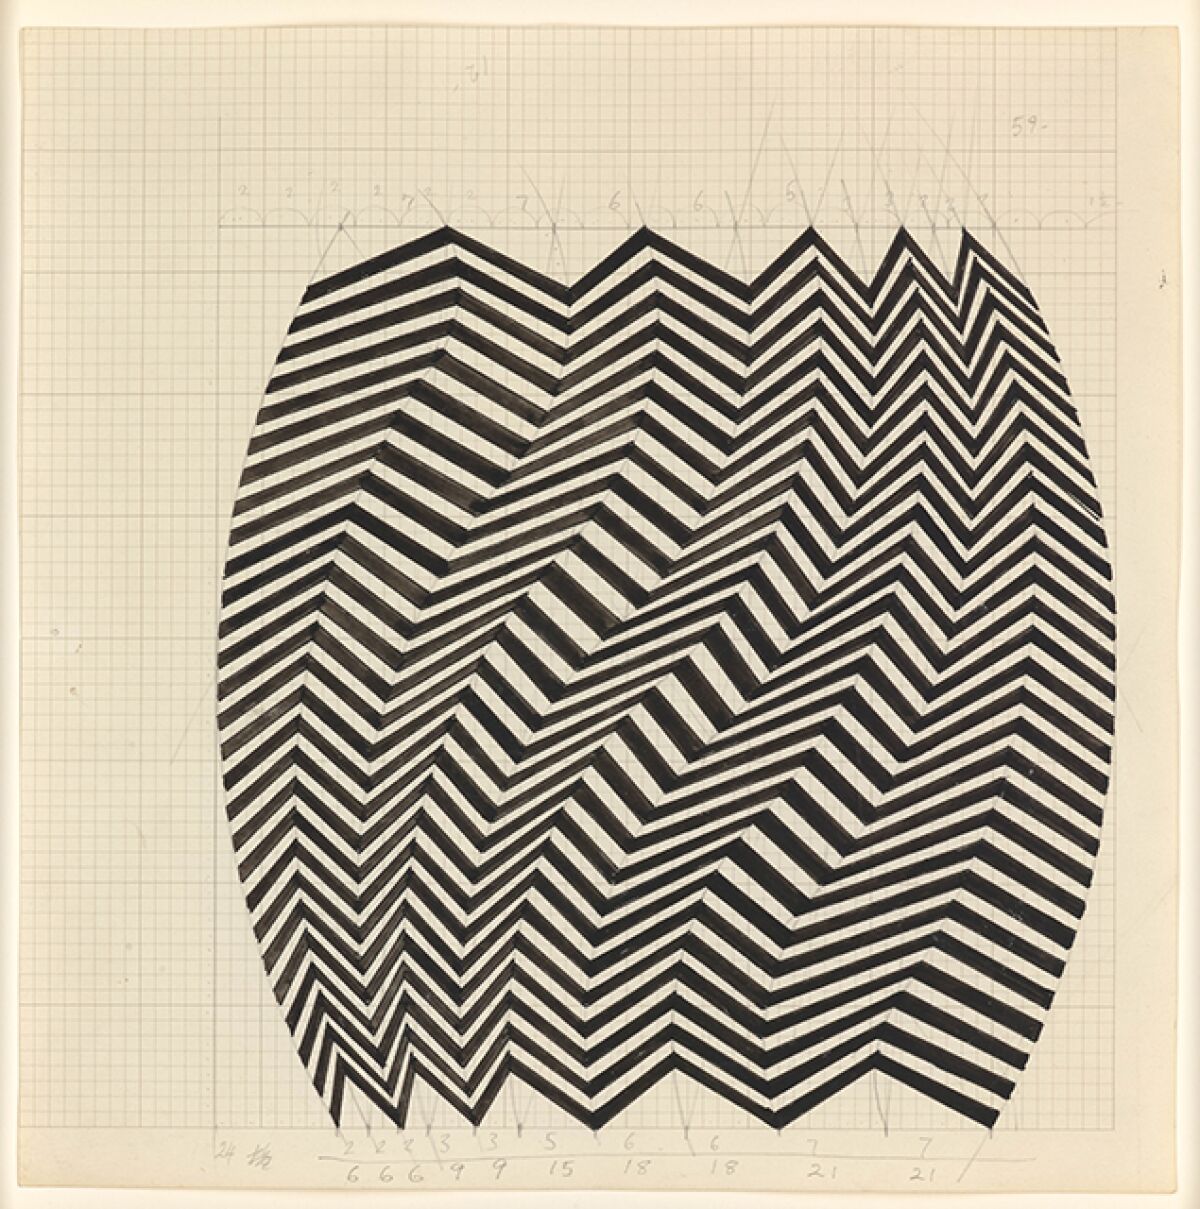 A op-art piece that's black and white zigzag lines on a lavender background